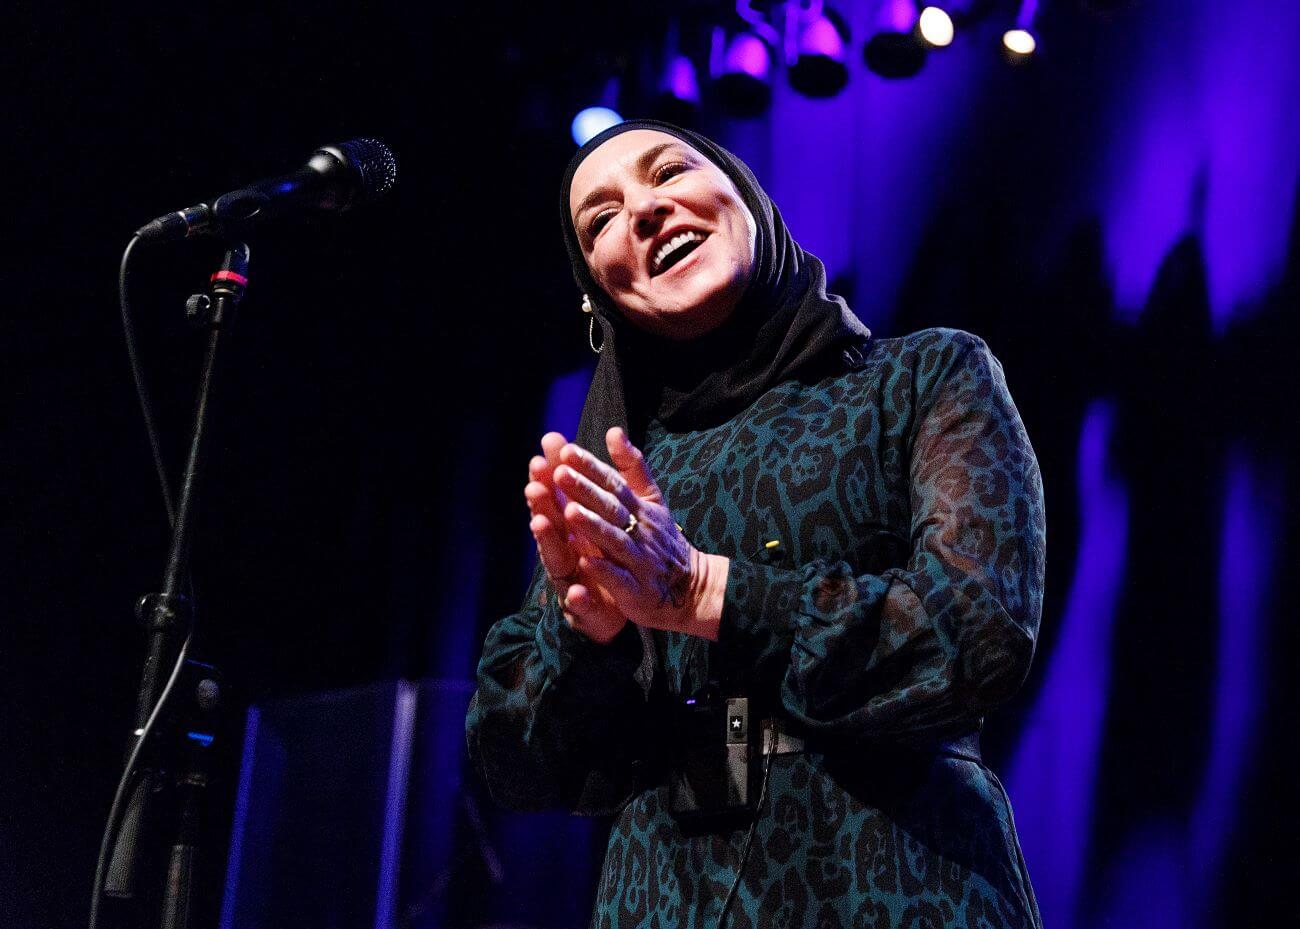 Sinead O'Connor wears a hijab and leopard print dress. She stands in front of a microphone and claps her hands together.